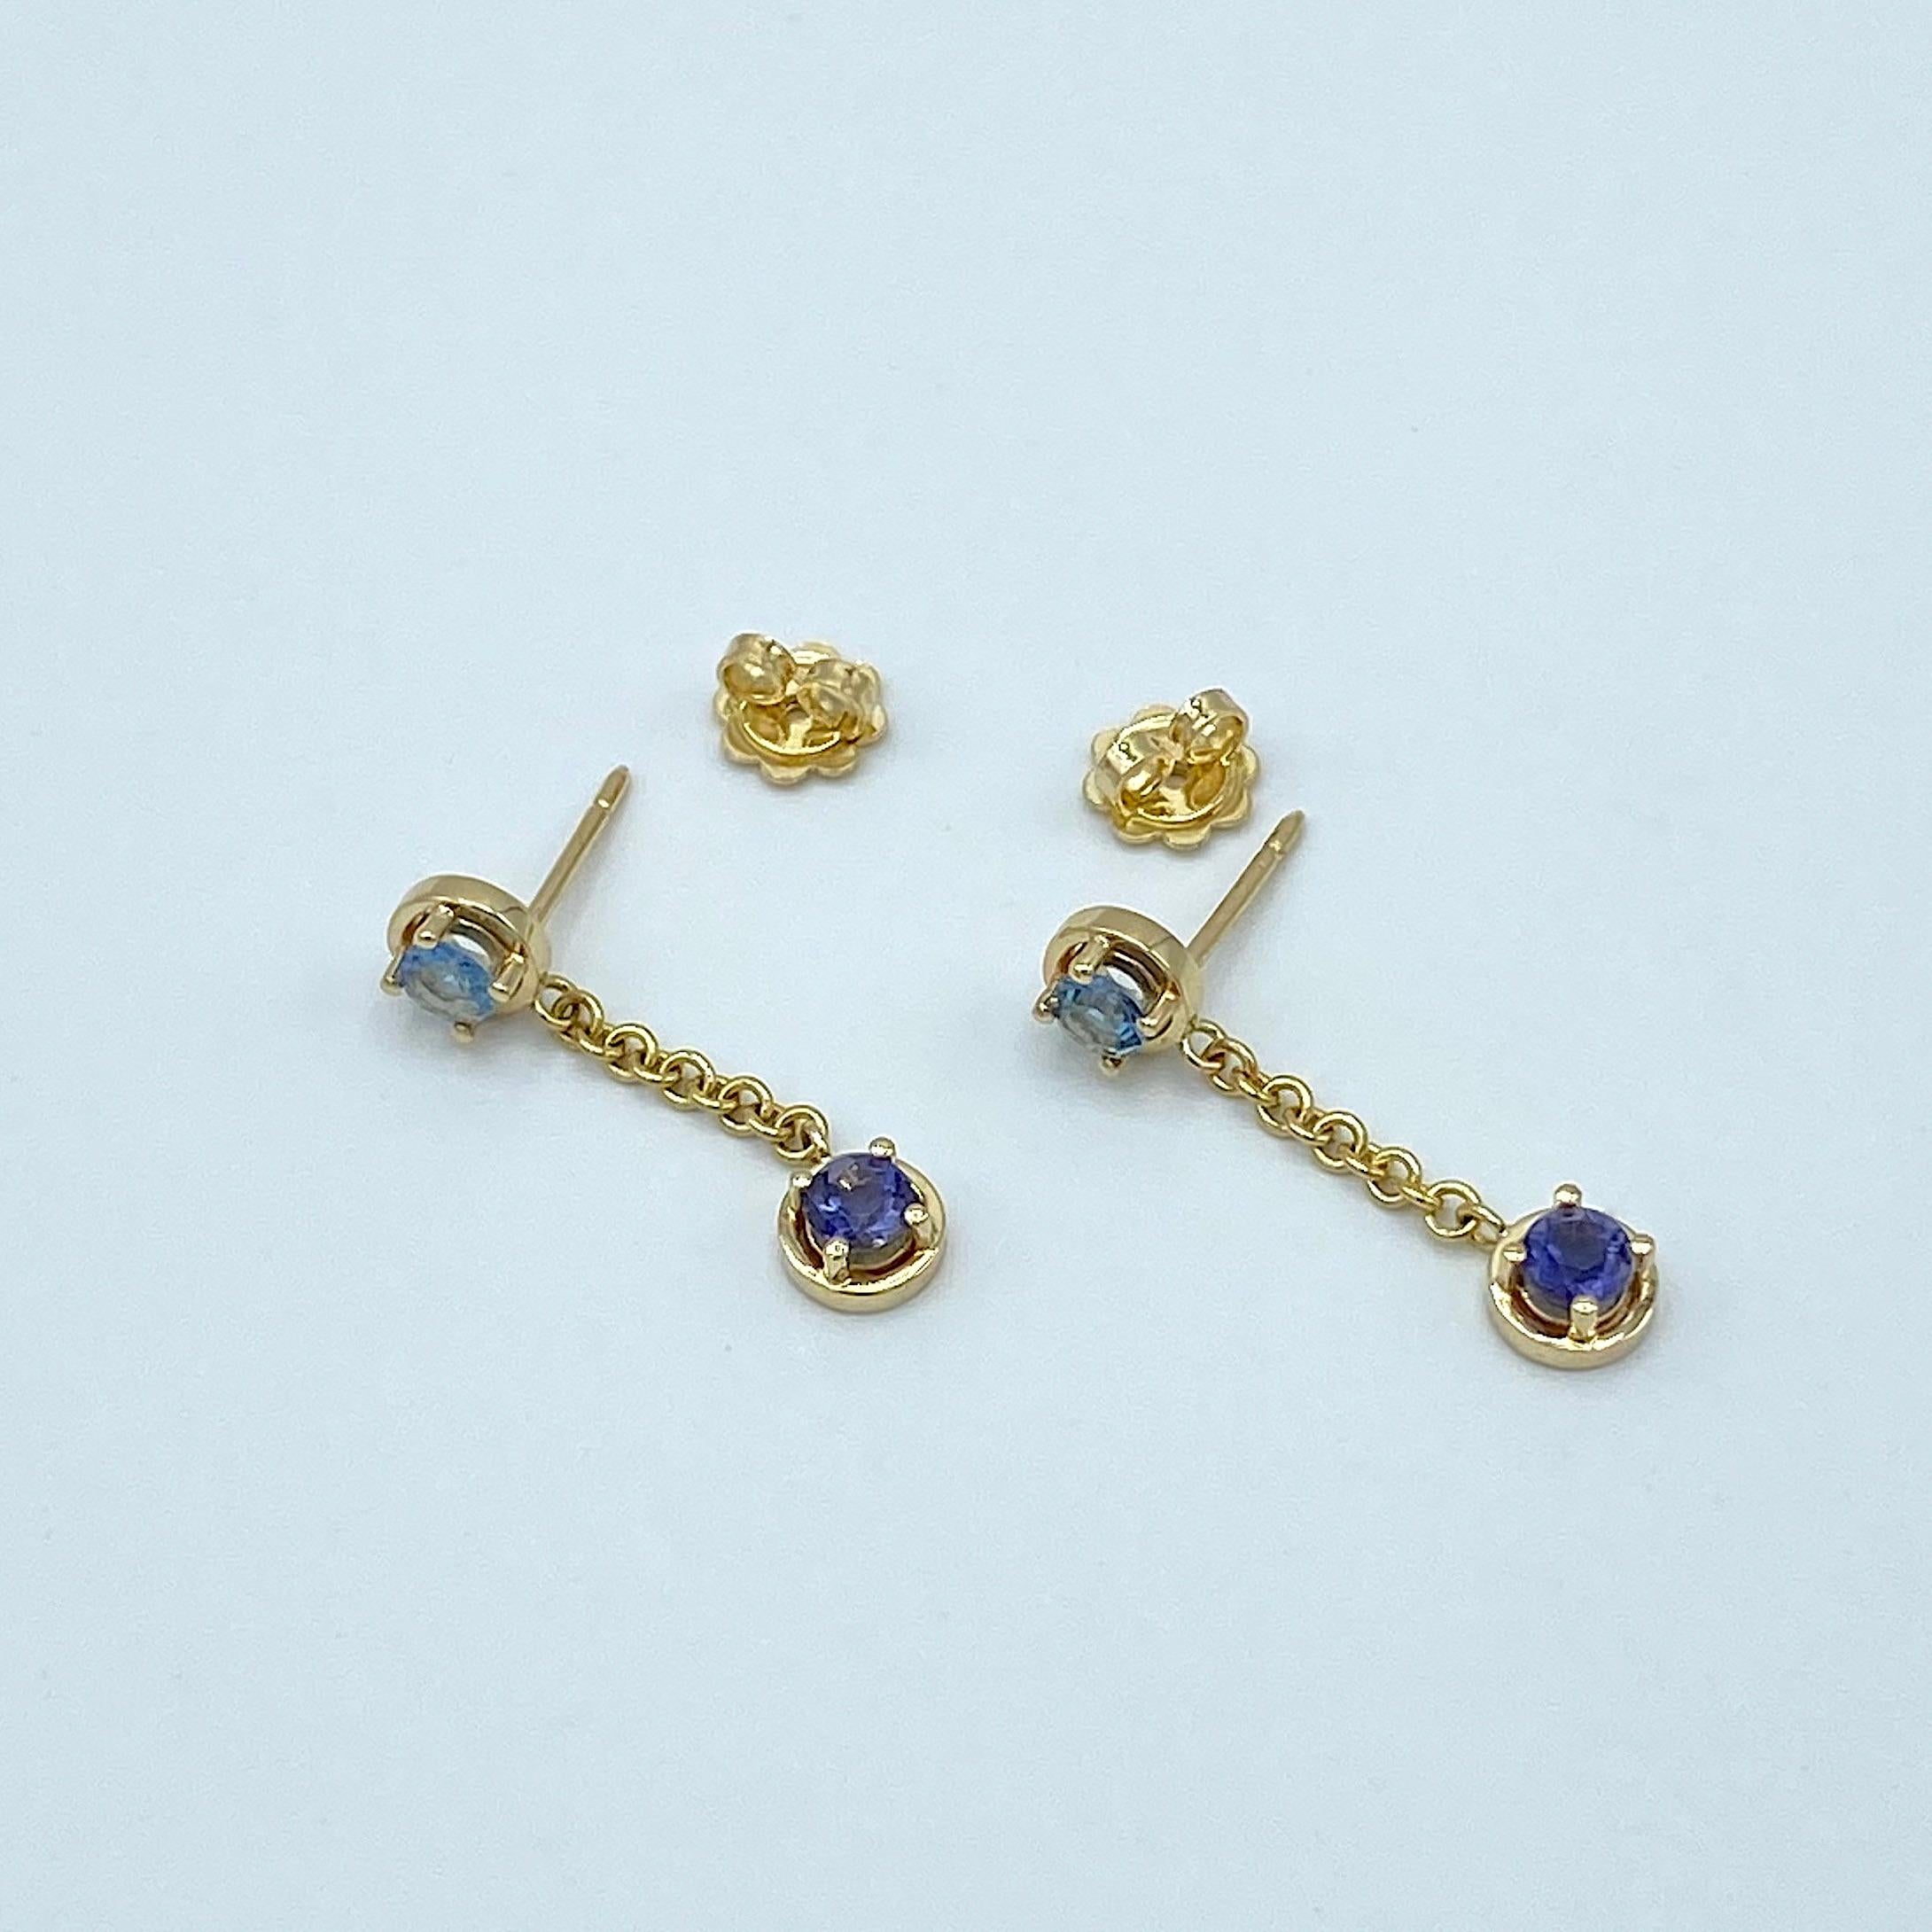 These earrings are one of the first pieces of the new color line.
They can be combined with some rings available in this shop (as you see in one of the images of this item)
They are handmade and the chain that connects the two stones is 1.5 cm long.